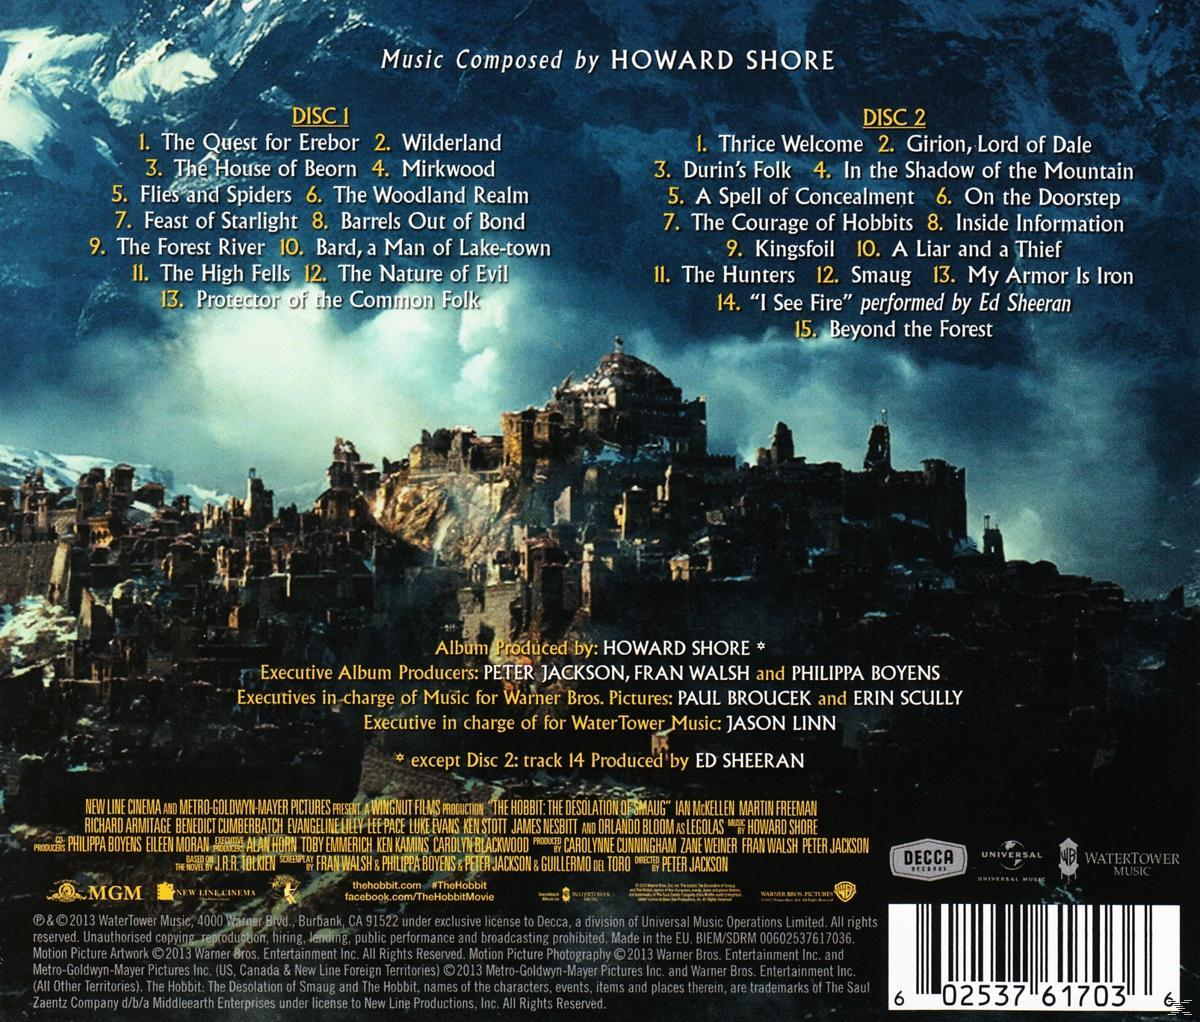 Desolation - Smaug Various Of The (CD) - Hobbit-The